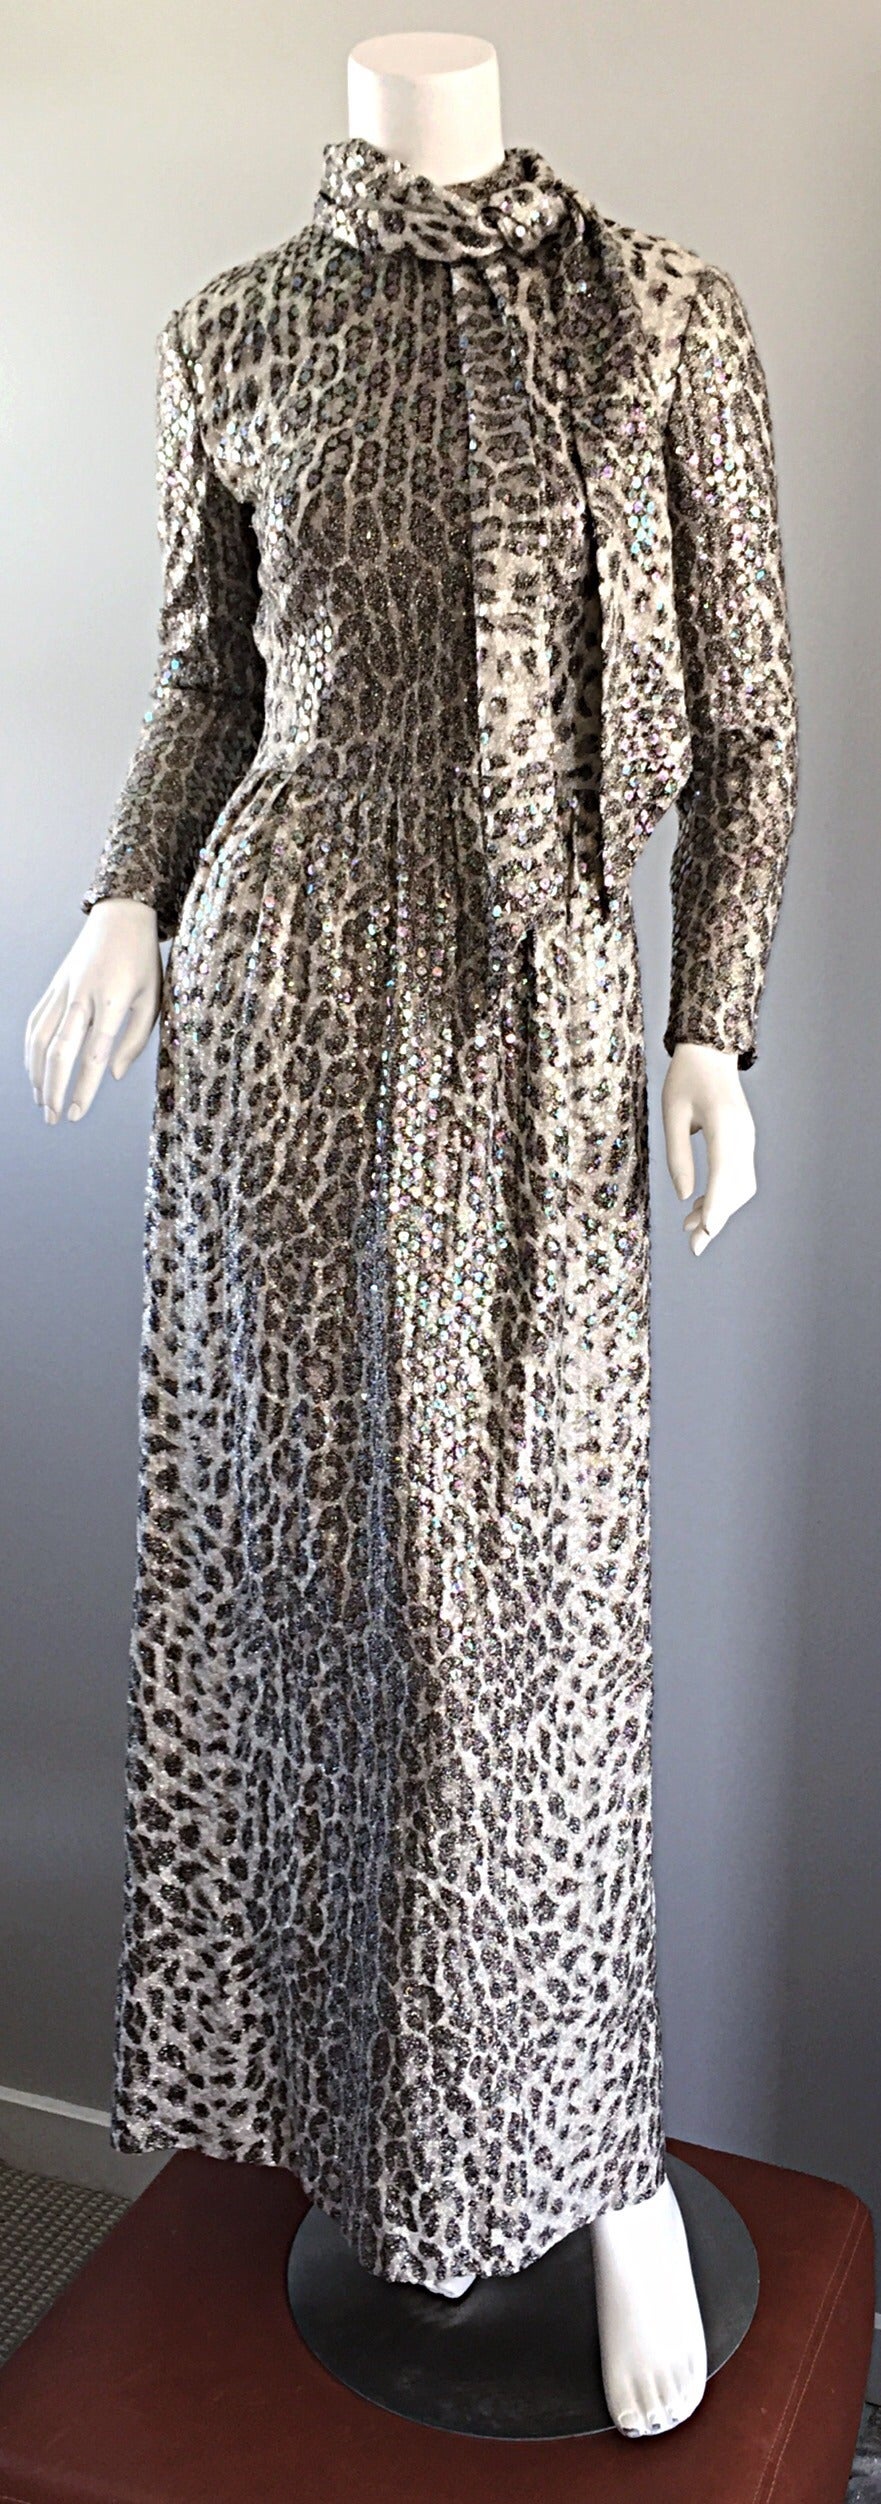 Incredible vintage Adele Simpson 'Snow Leopard' all-over sequin dress and sash! With leopard prints all over the current runway, this dress is right on trend! Chic leopard print throughout, with thousands of iridescent sequins. Hidden zipper up the